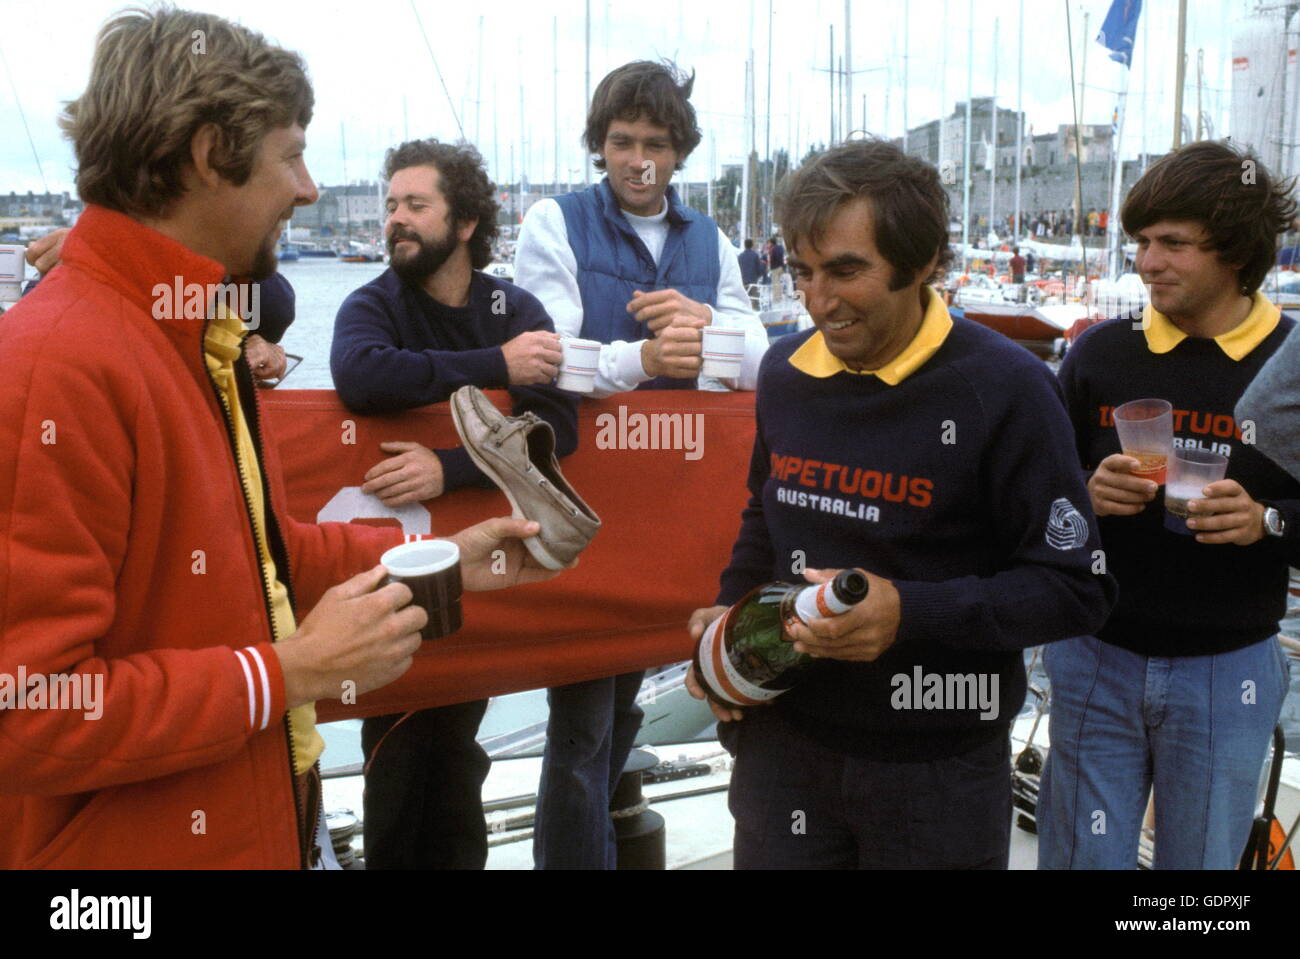 AJAX NEWS PHOTOS. AUGUST, 1979. PLYMOUTH, ENGLAND. - FASTNET 79 - ADMIRAL'S CUP - WINNERS - AUSTRALIAN TEAM MEMBERS CELEBRATE THEIR VICTORY DURING AN IMPROMPTU CHAMPAGNE PARTY AFTER POINTS SCORE WAS ANNOUNCED IN PLYMOUTH. PHOTO:JONATHAN EASTLAND/AJAX.  REF: 215014/81 Stock Photo